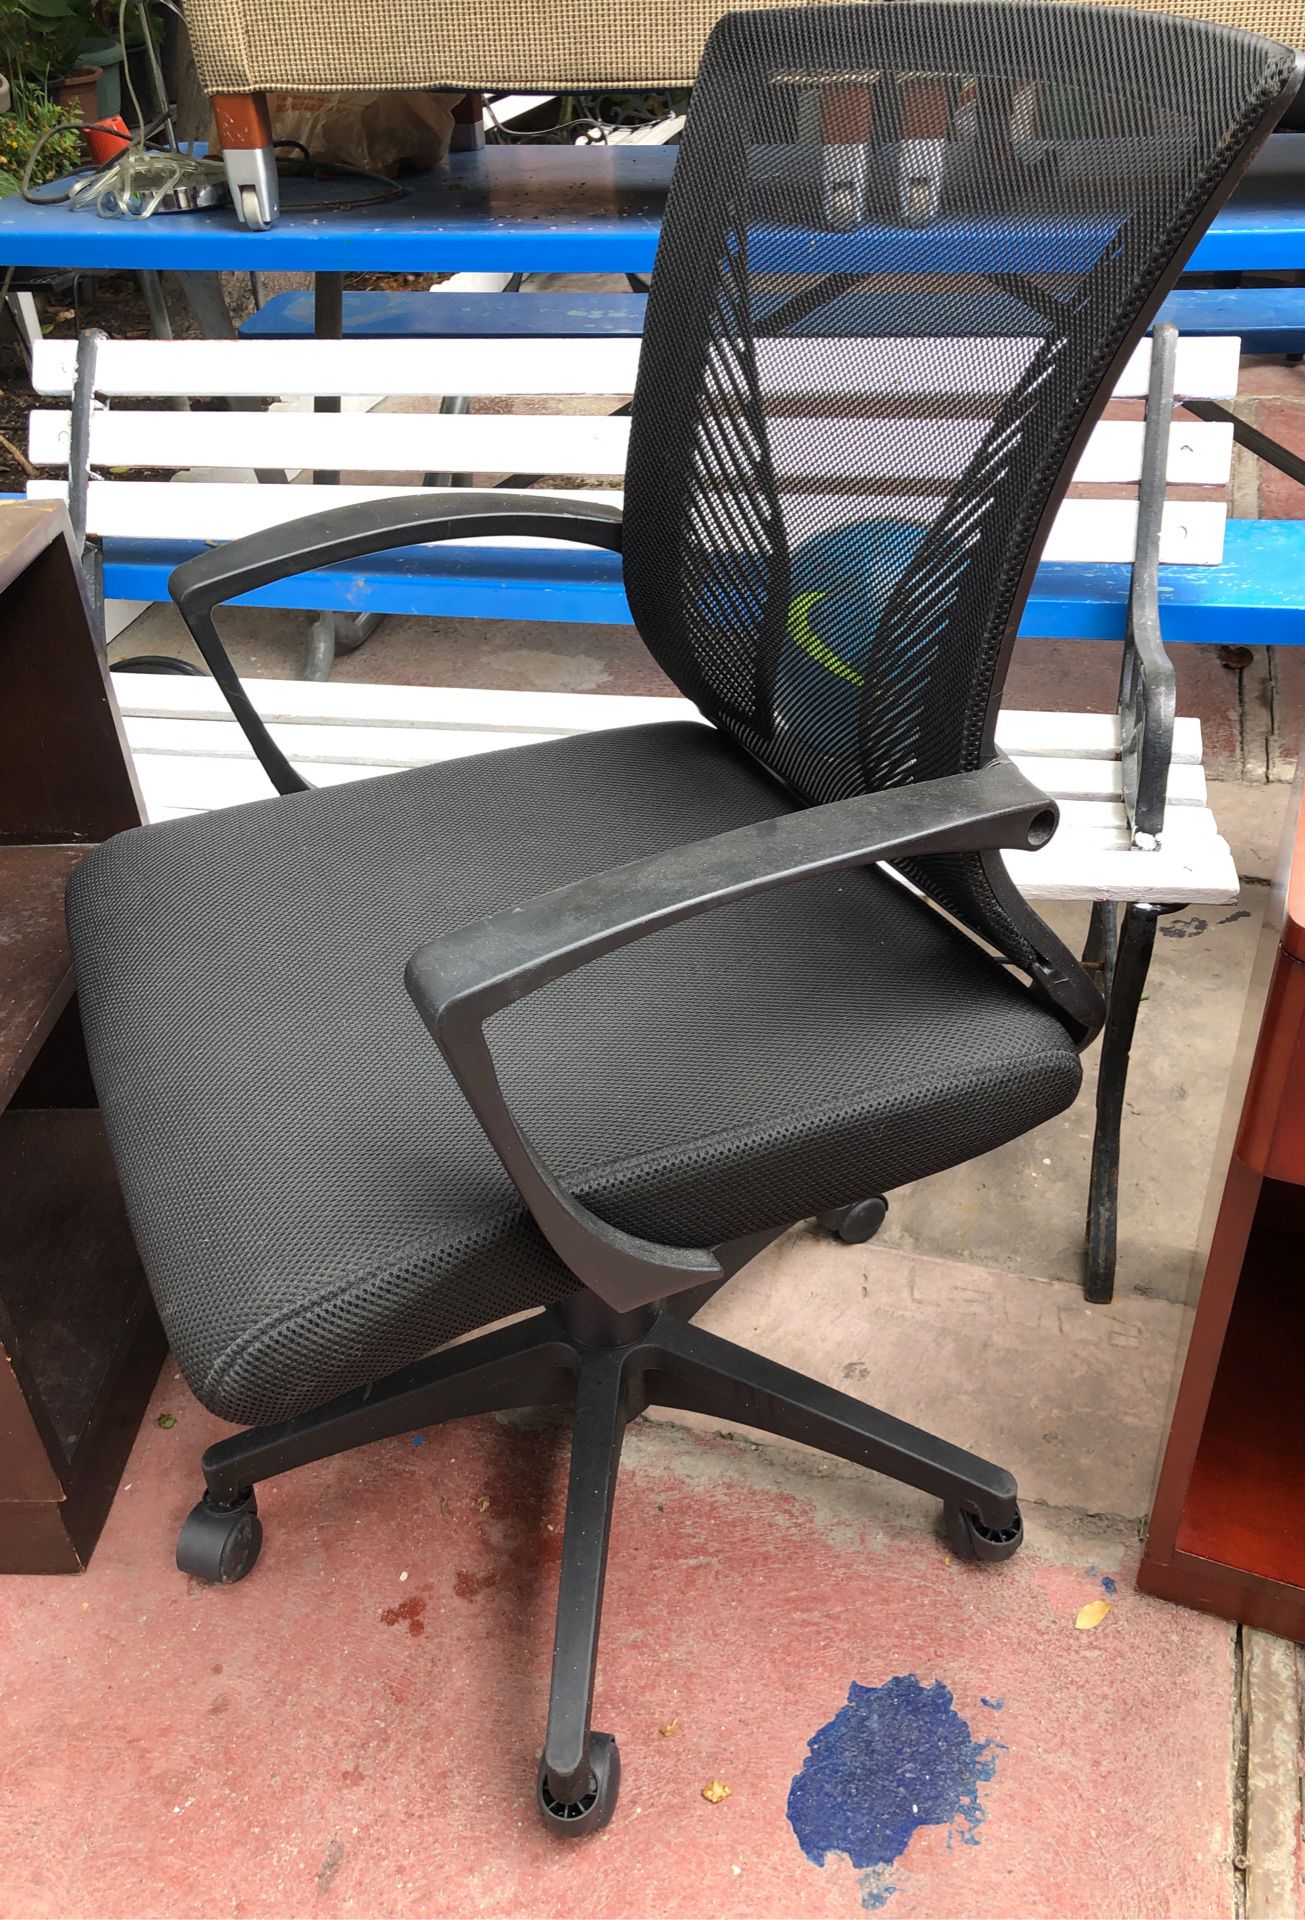 Office chair with missing wheel